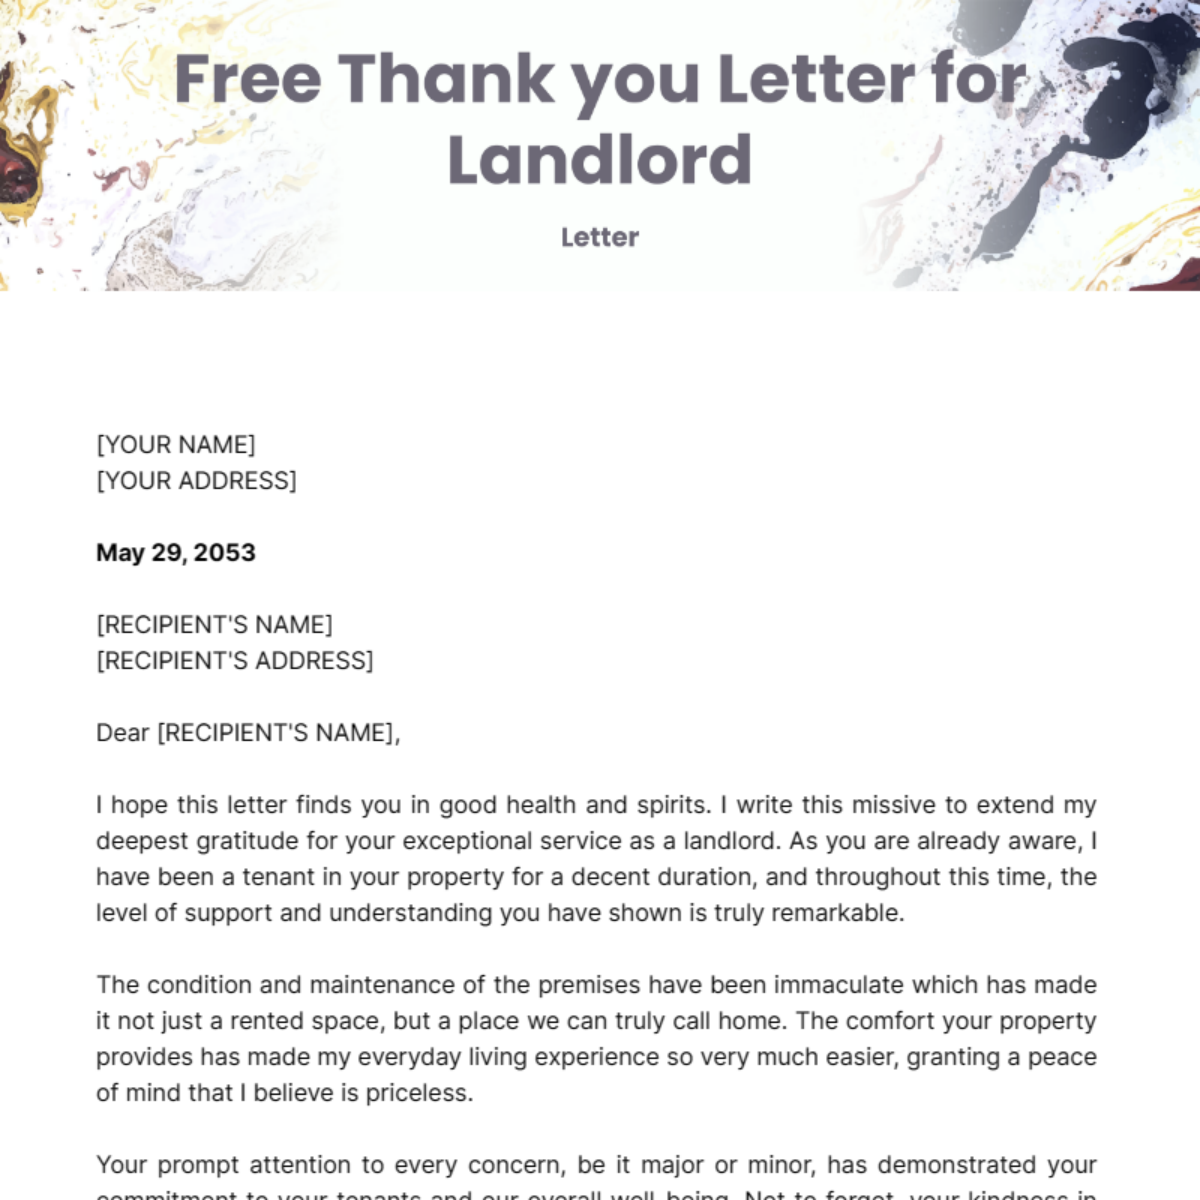 Thank you Letter for Landlord Template